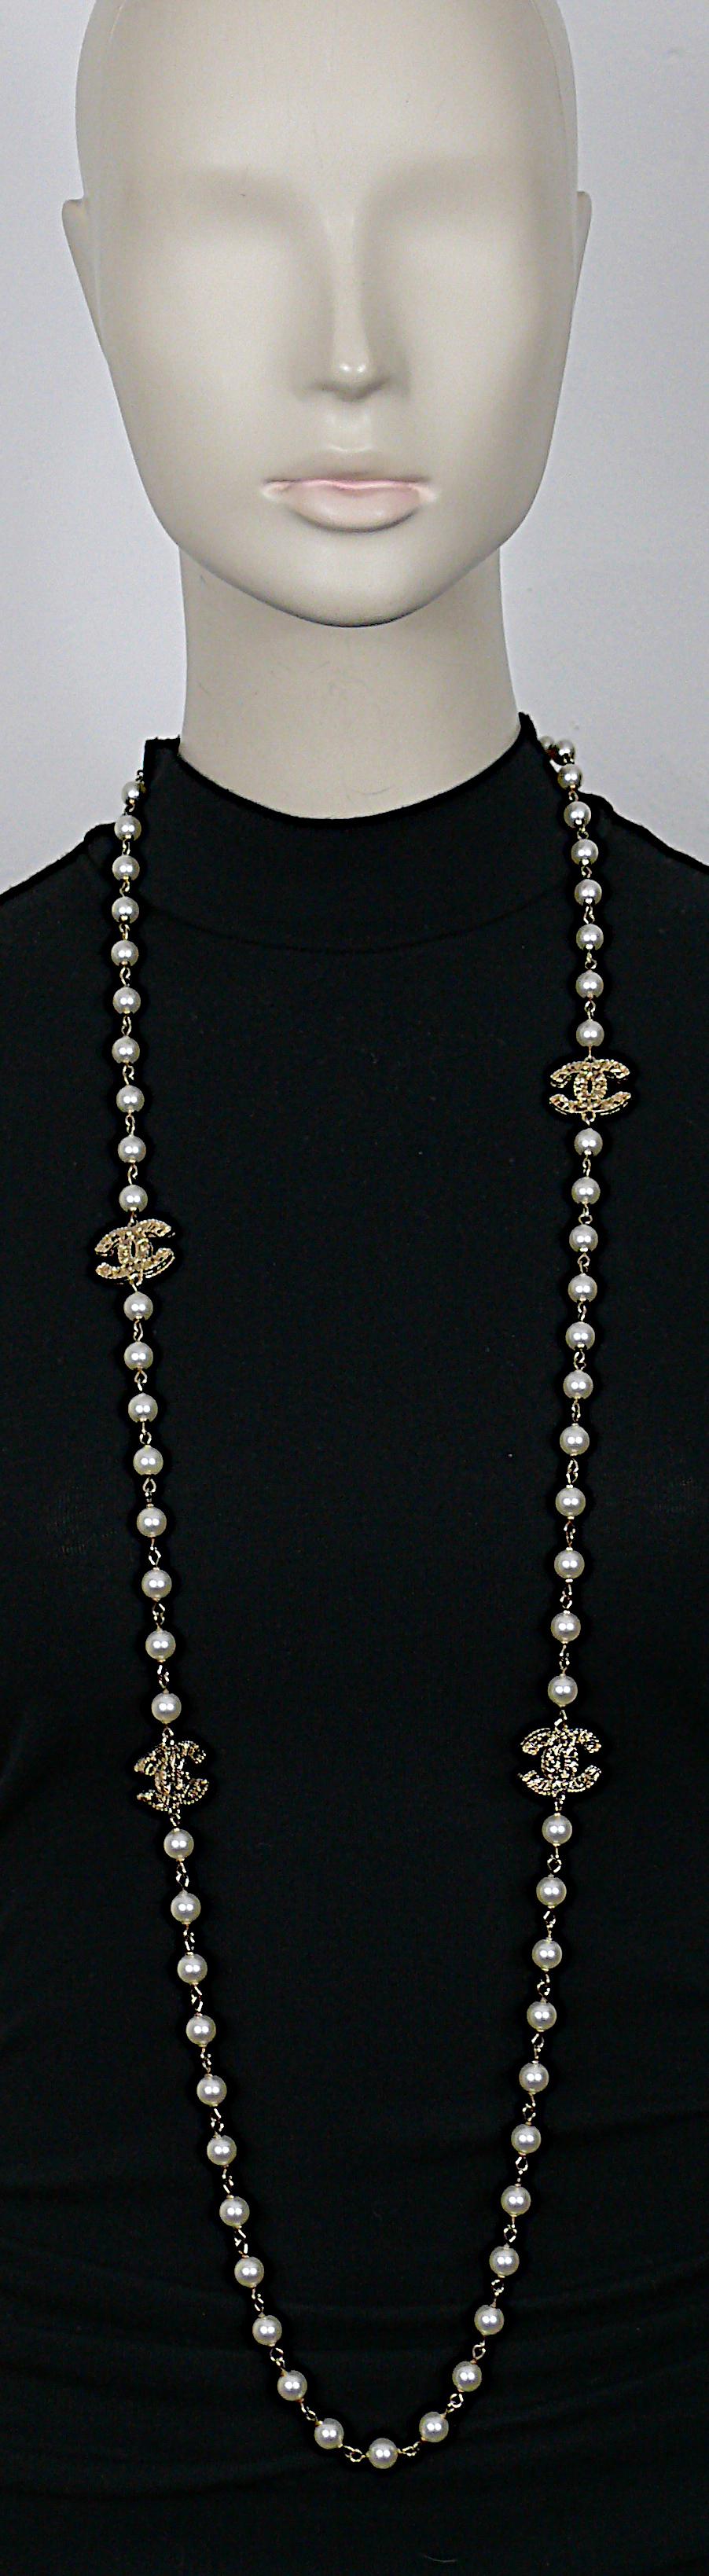 CHANEL by KARL LAGERFELD gold tone faux pearl necklace featuring 4 CC logos.

From the Fall 2008 Collection.

Lobster clasp closure.

Embossed CHANEL 08A Made in France.

Indicative measurements : length approx. 117 cm (46.06 inches) / CC logo